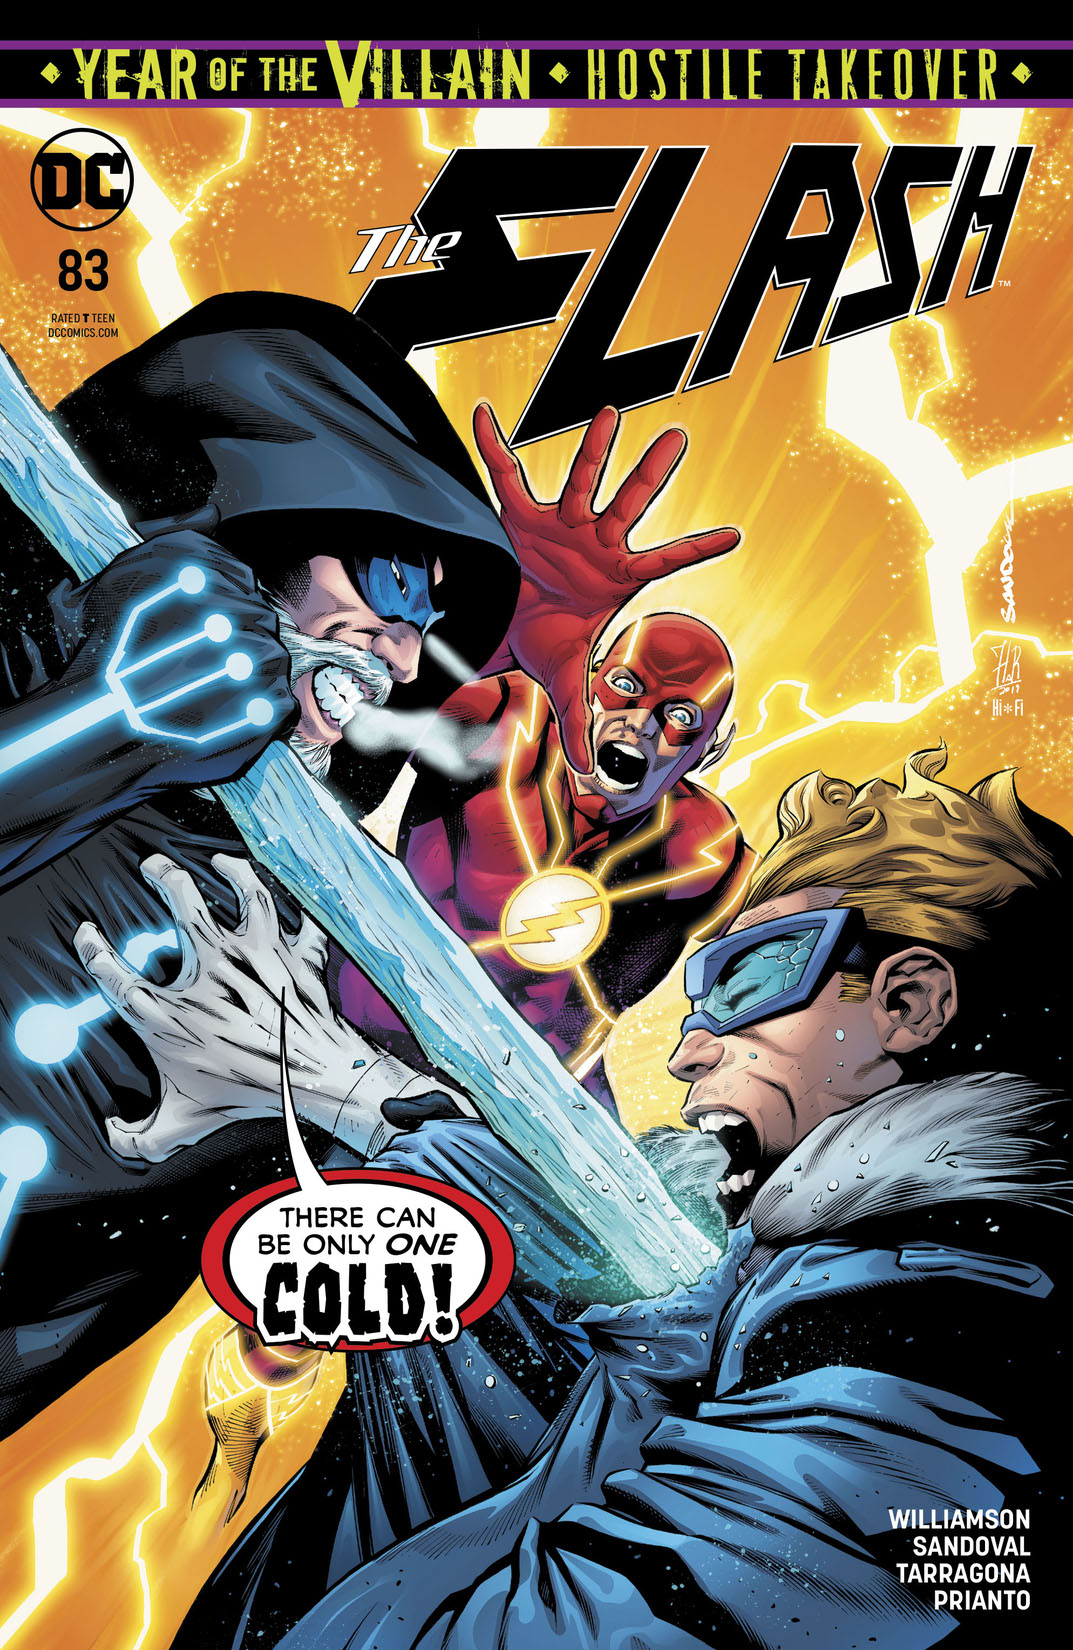 The Flash (2016-) #83 preview images